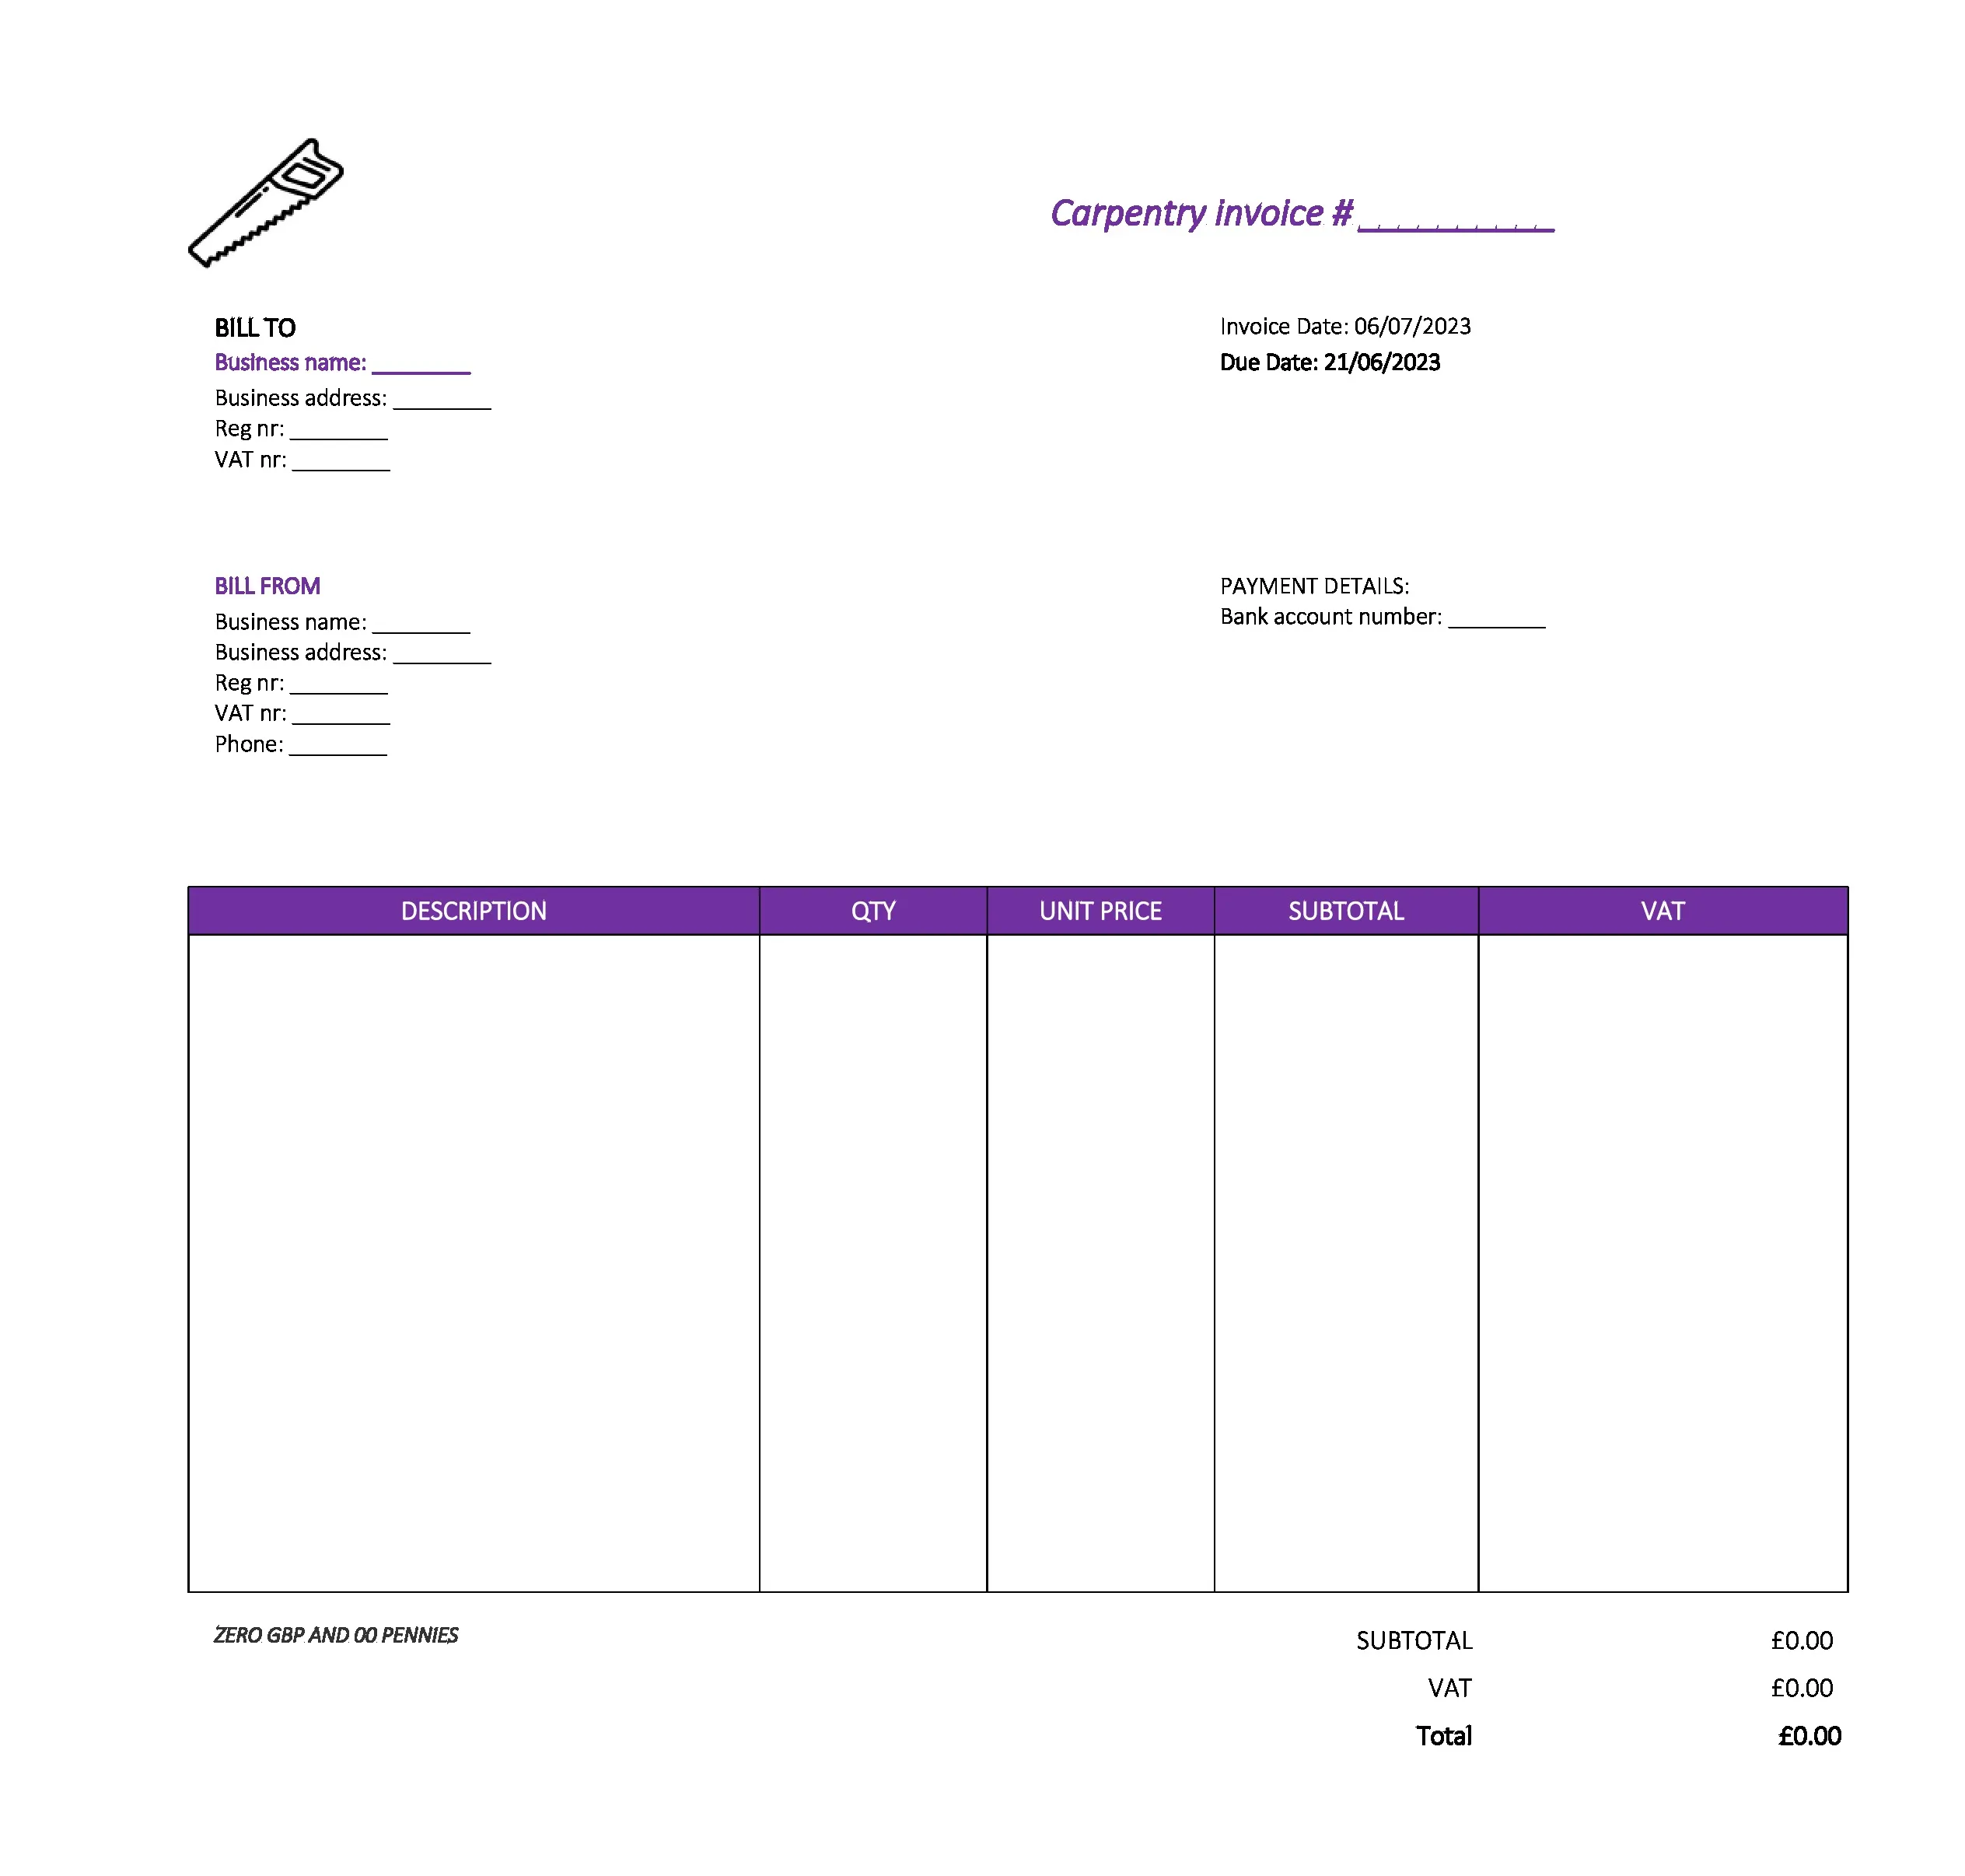 cool carpentry invoice template UK Excel / Google sheets